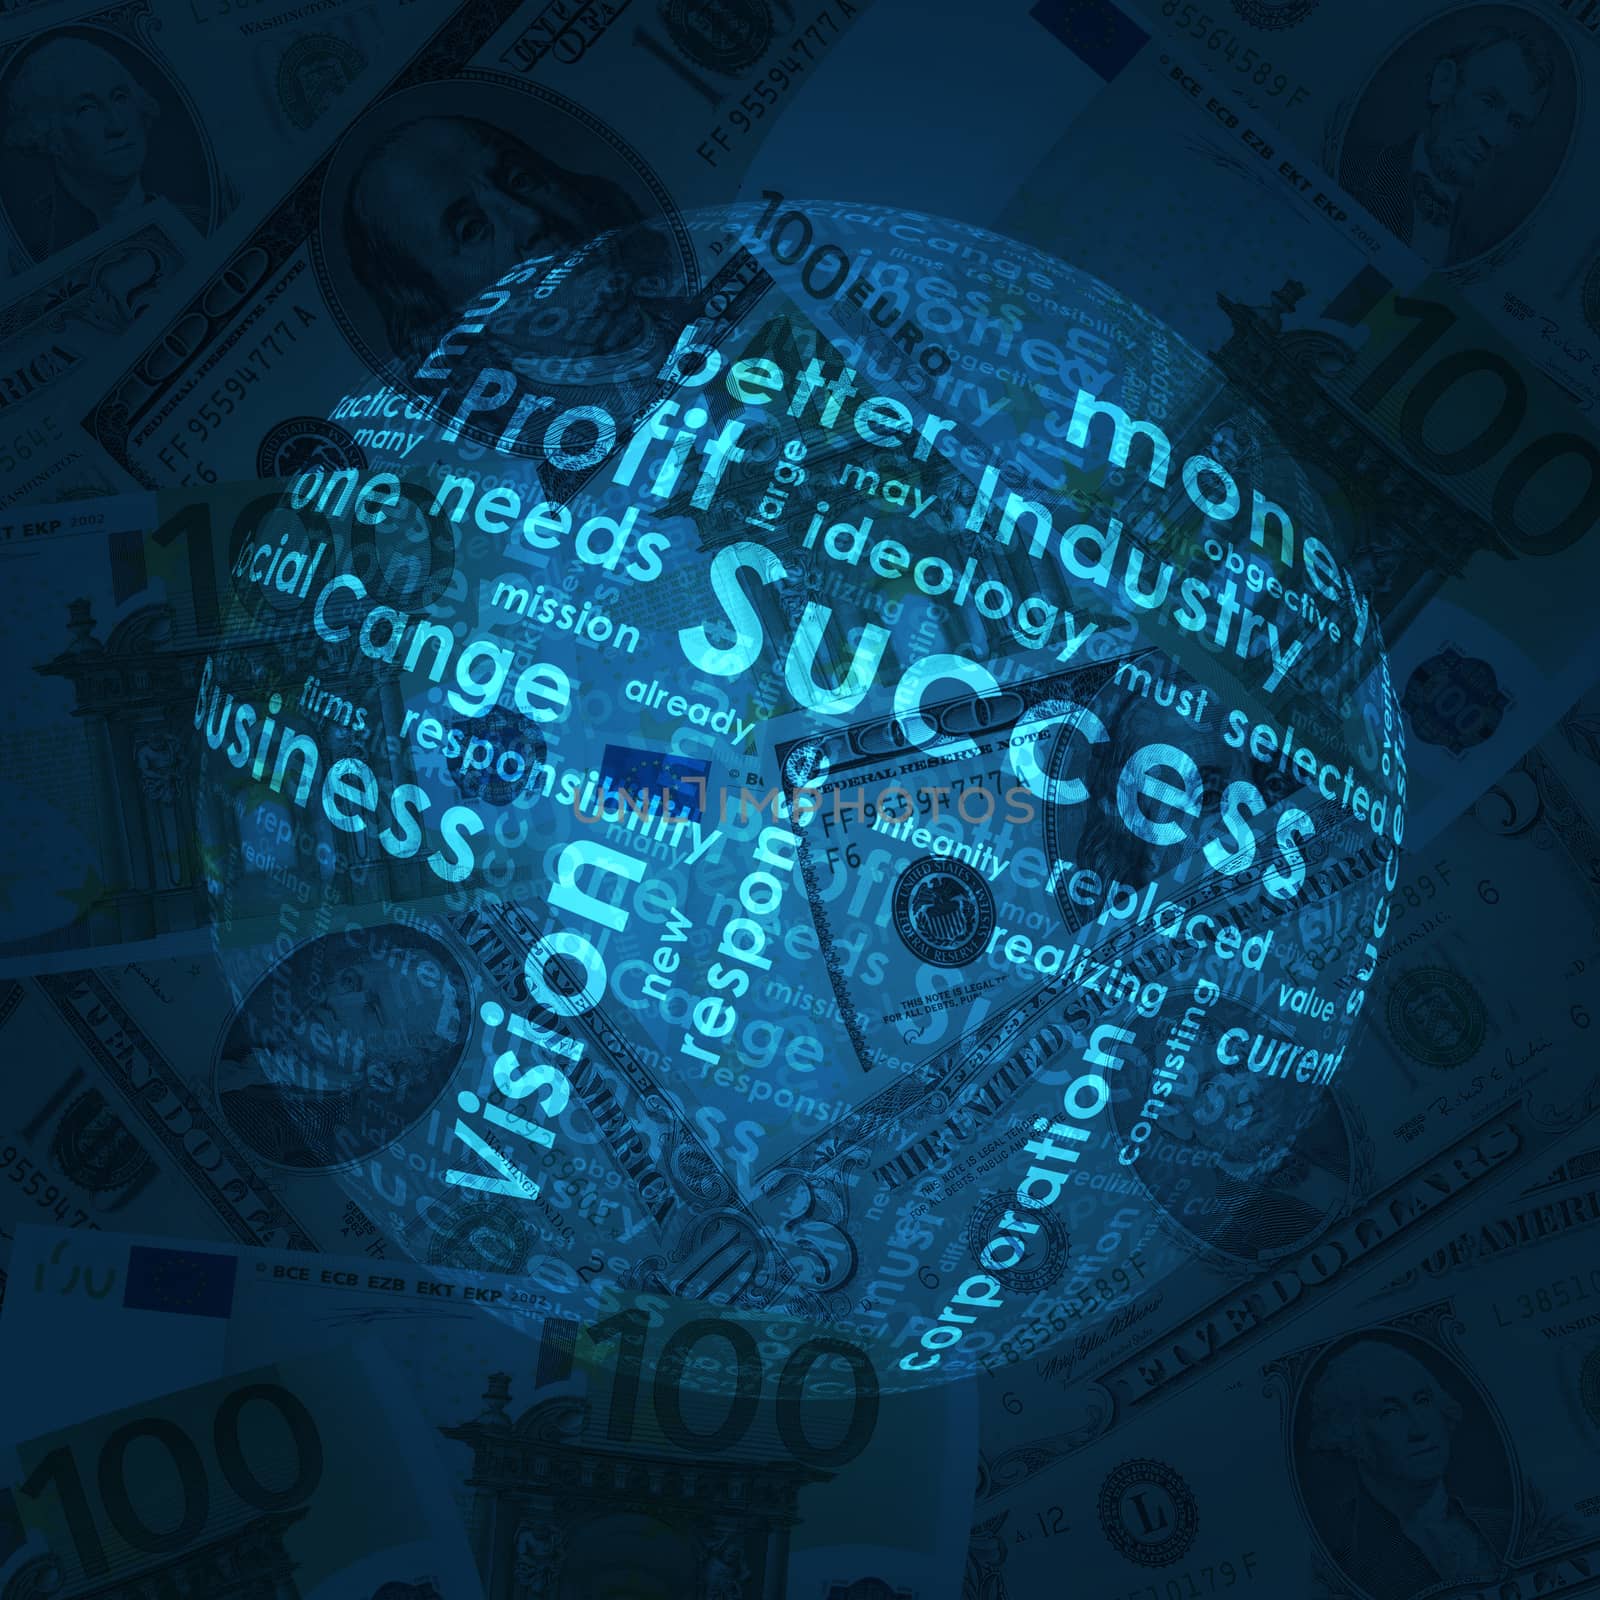 Sphere consisting of business words on money background